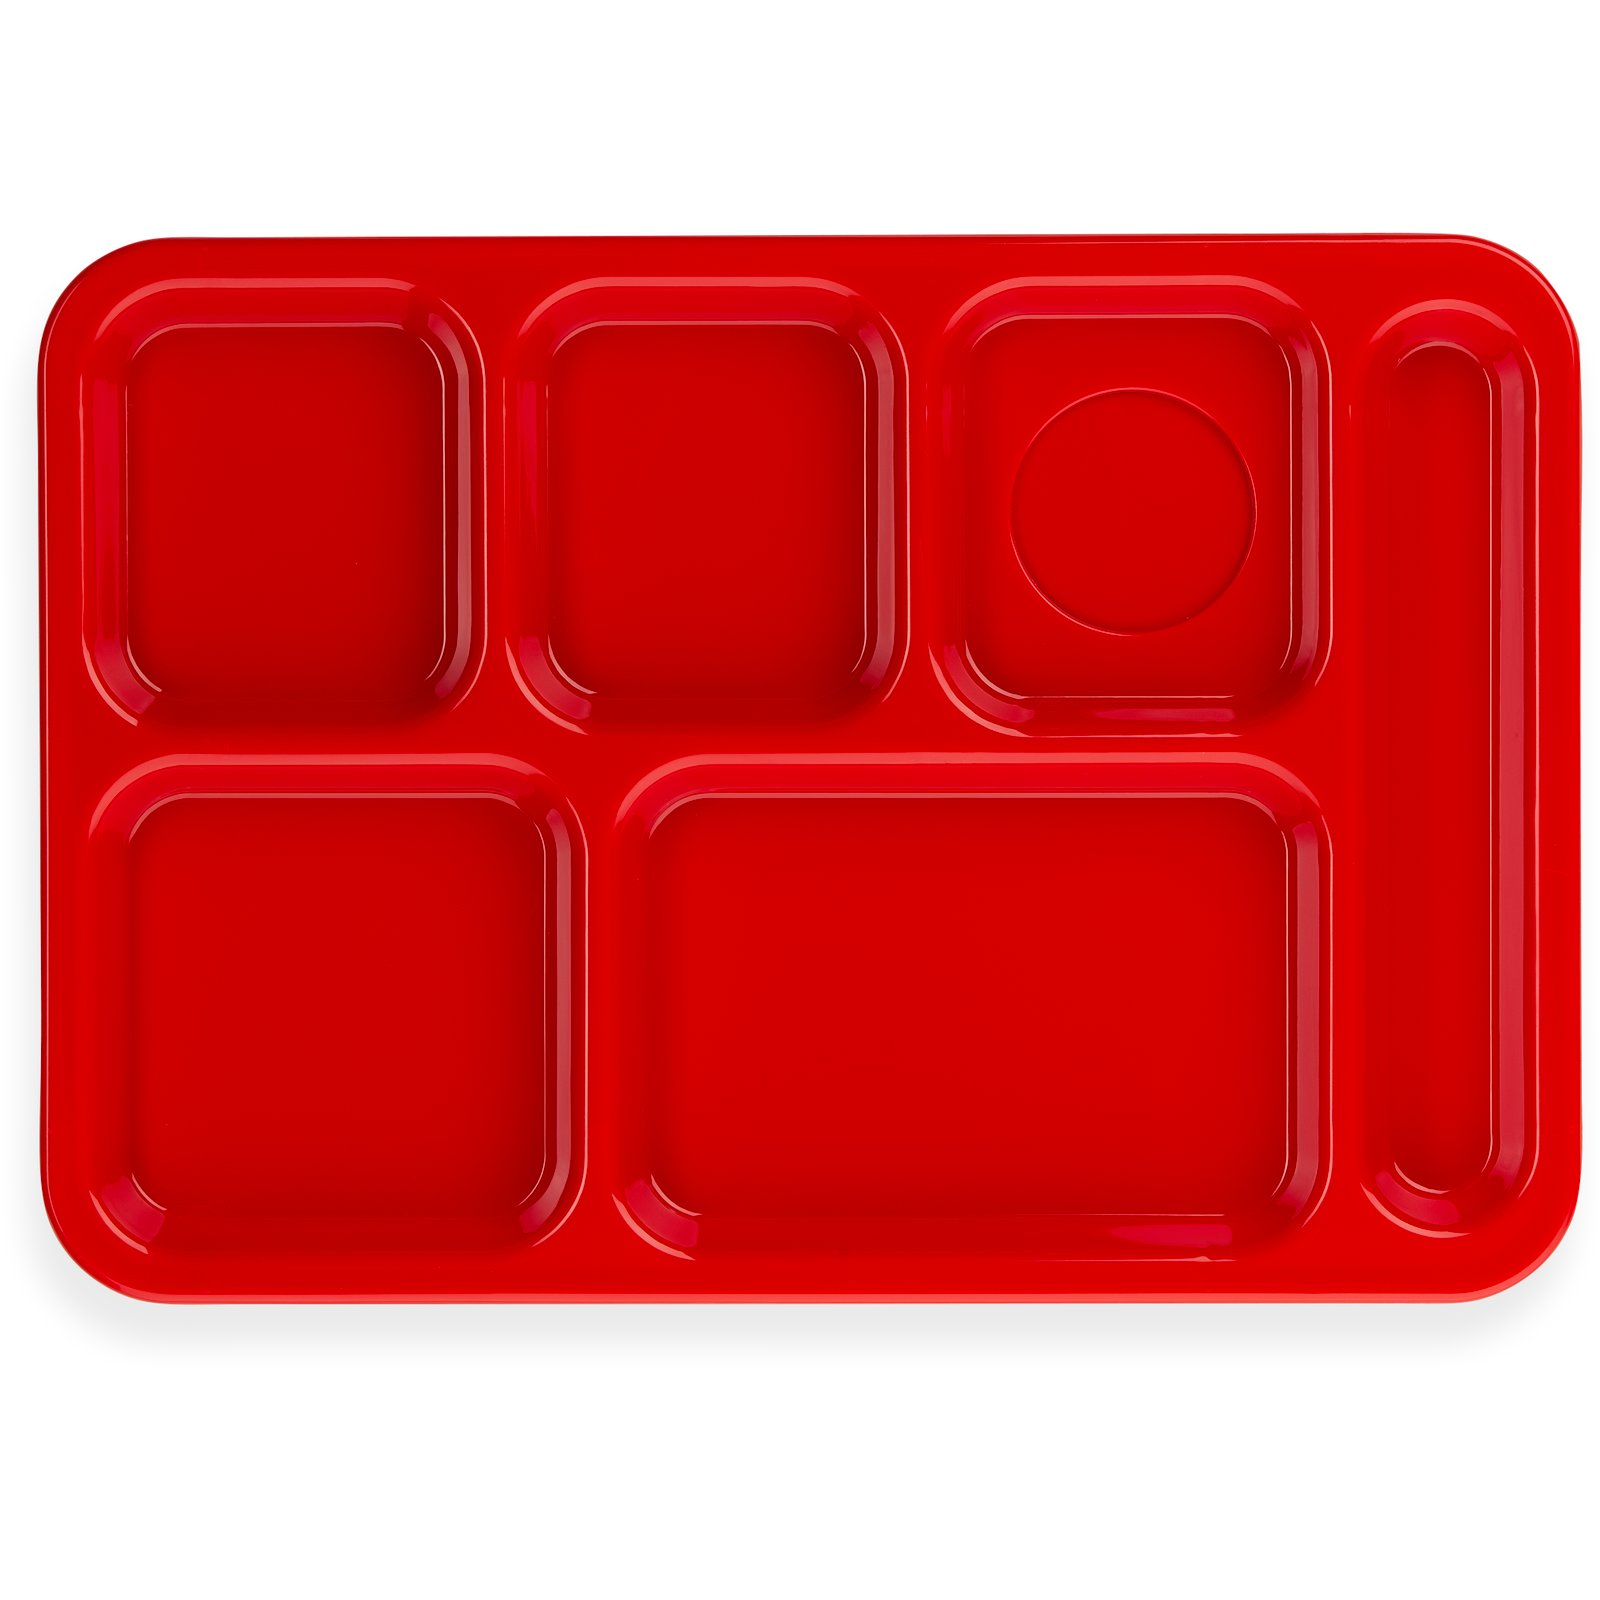 4 Compartment Tray with Lid, 9.4 x 6.3 x 2